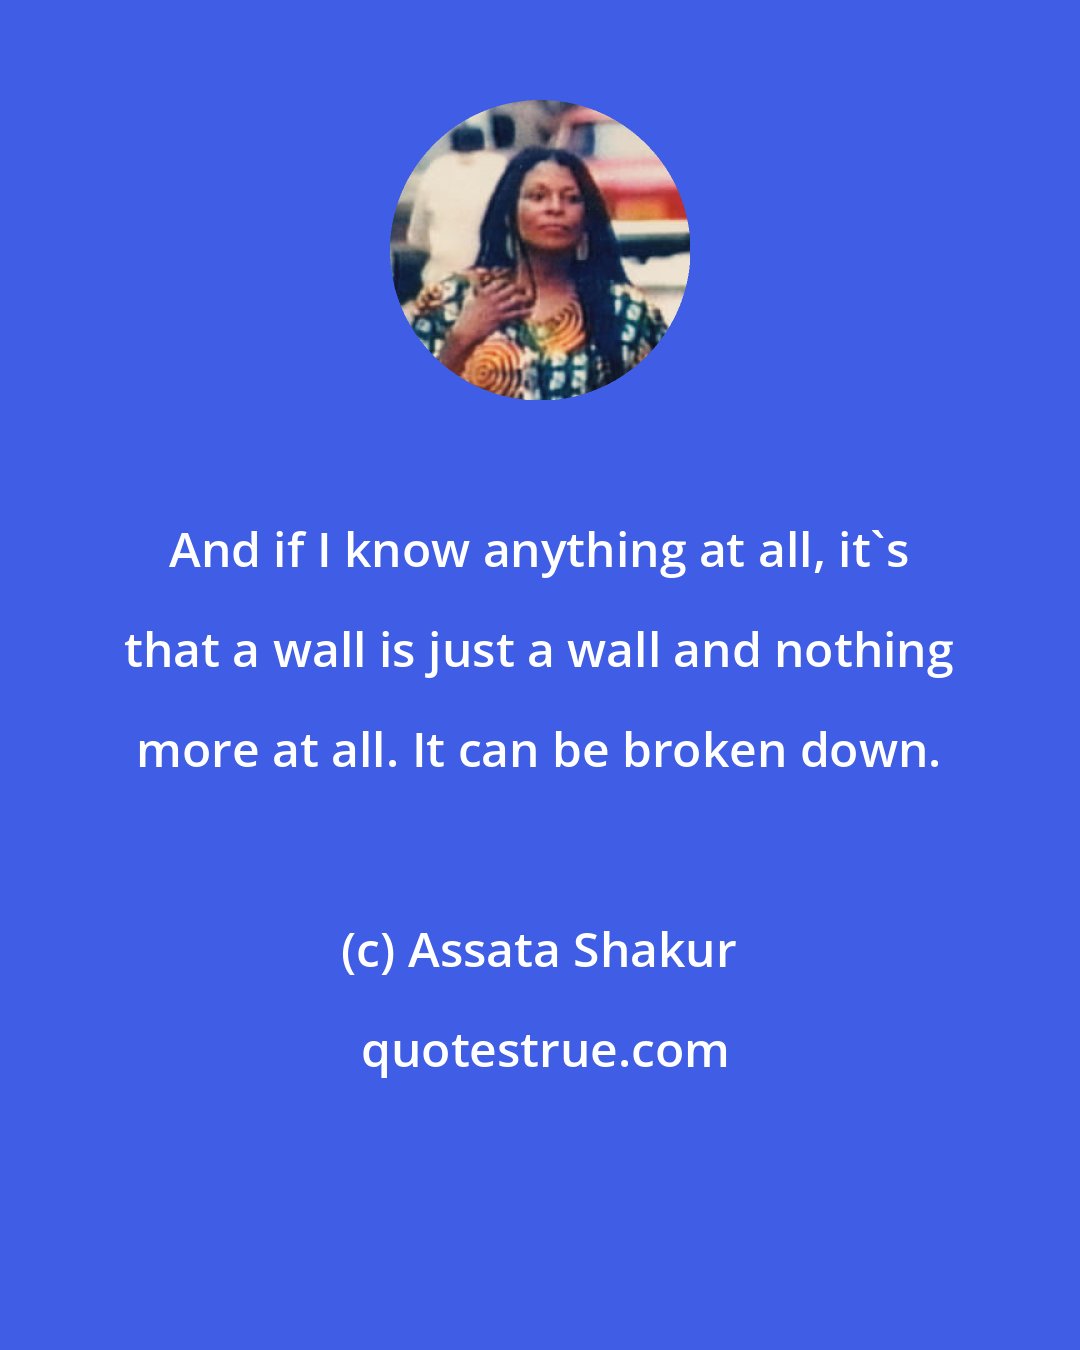 Assata Shakur: And if I know anything at all, it's that a wall is just a wall and nothing more at all. It can be broken down.